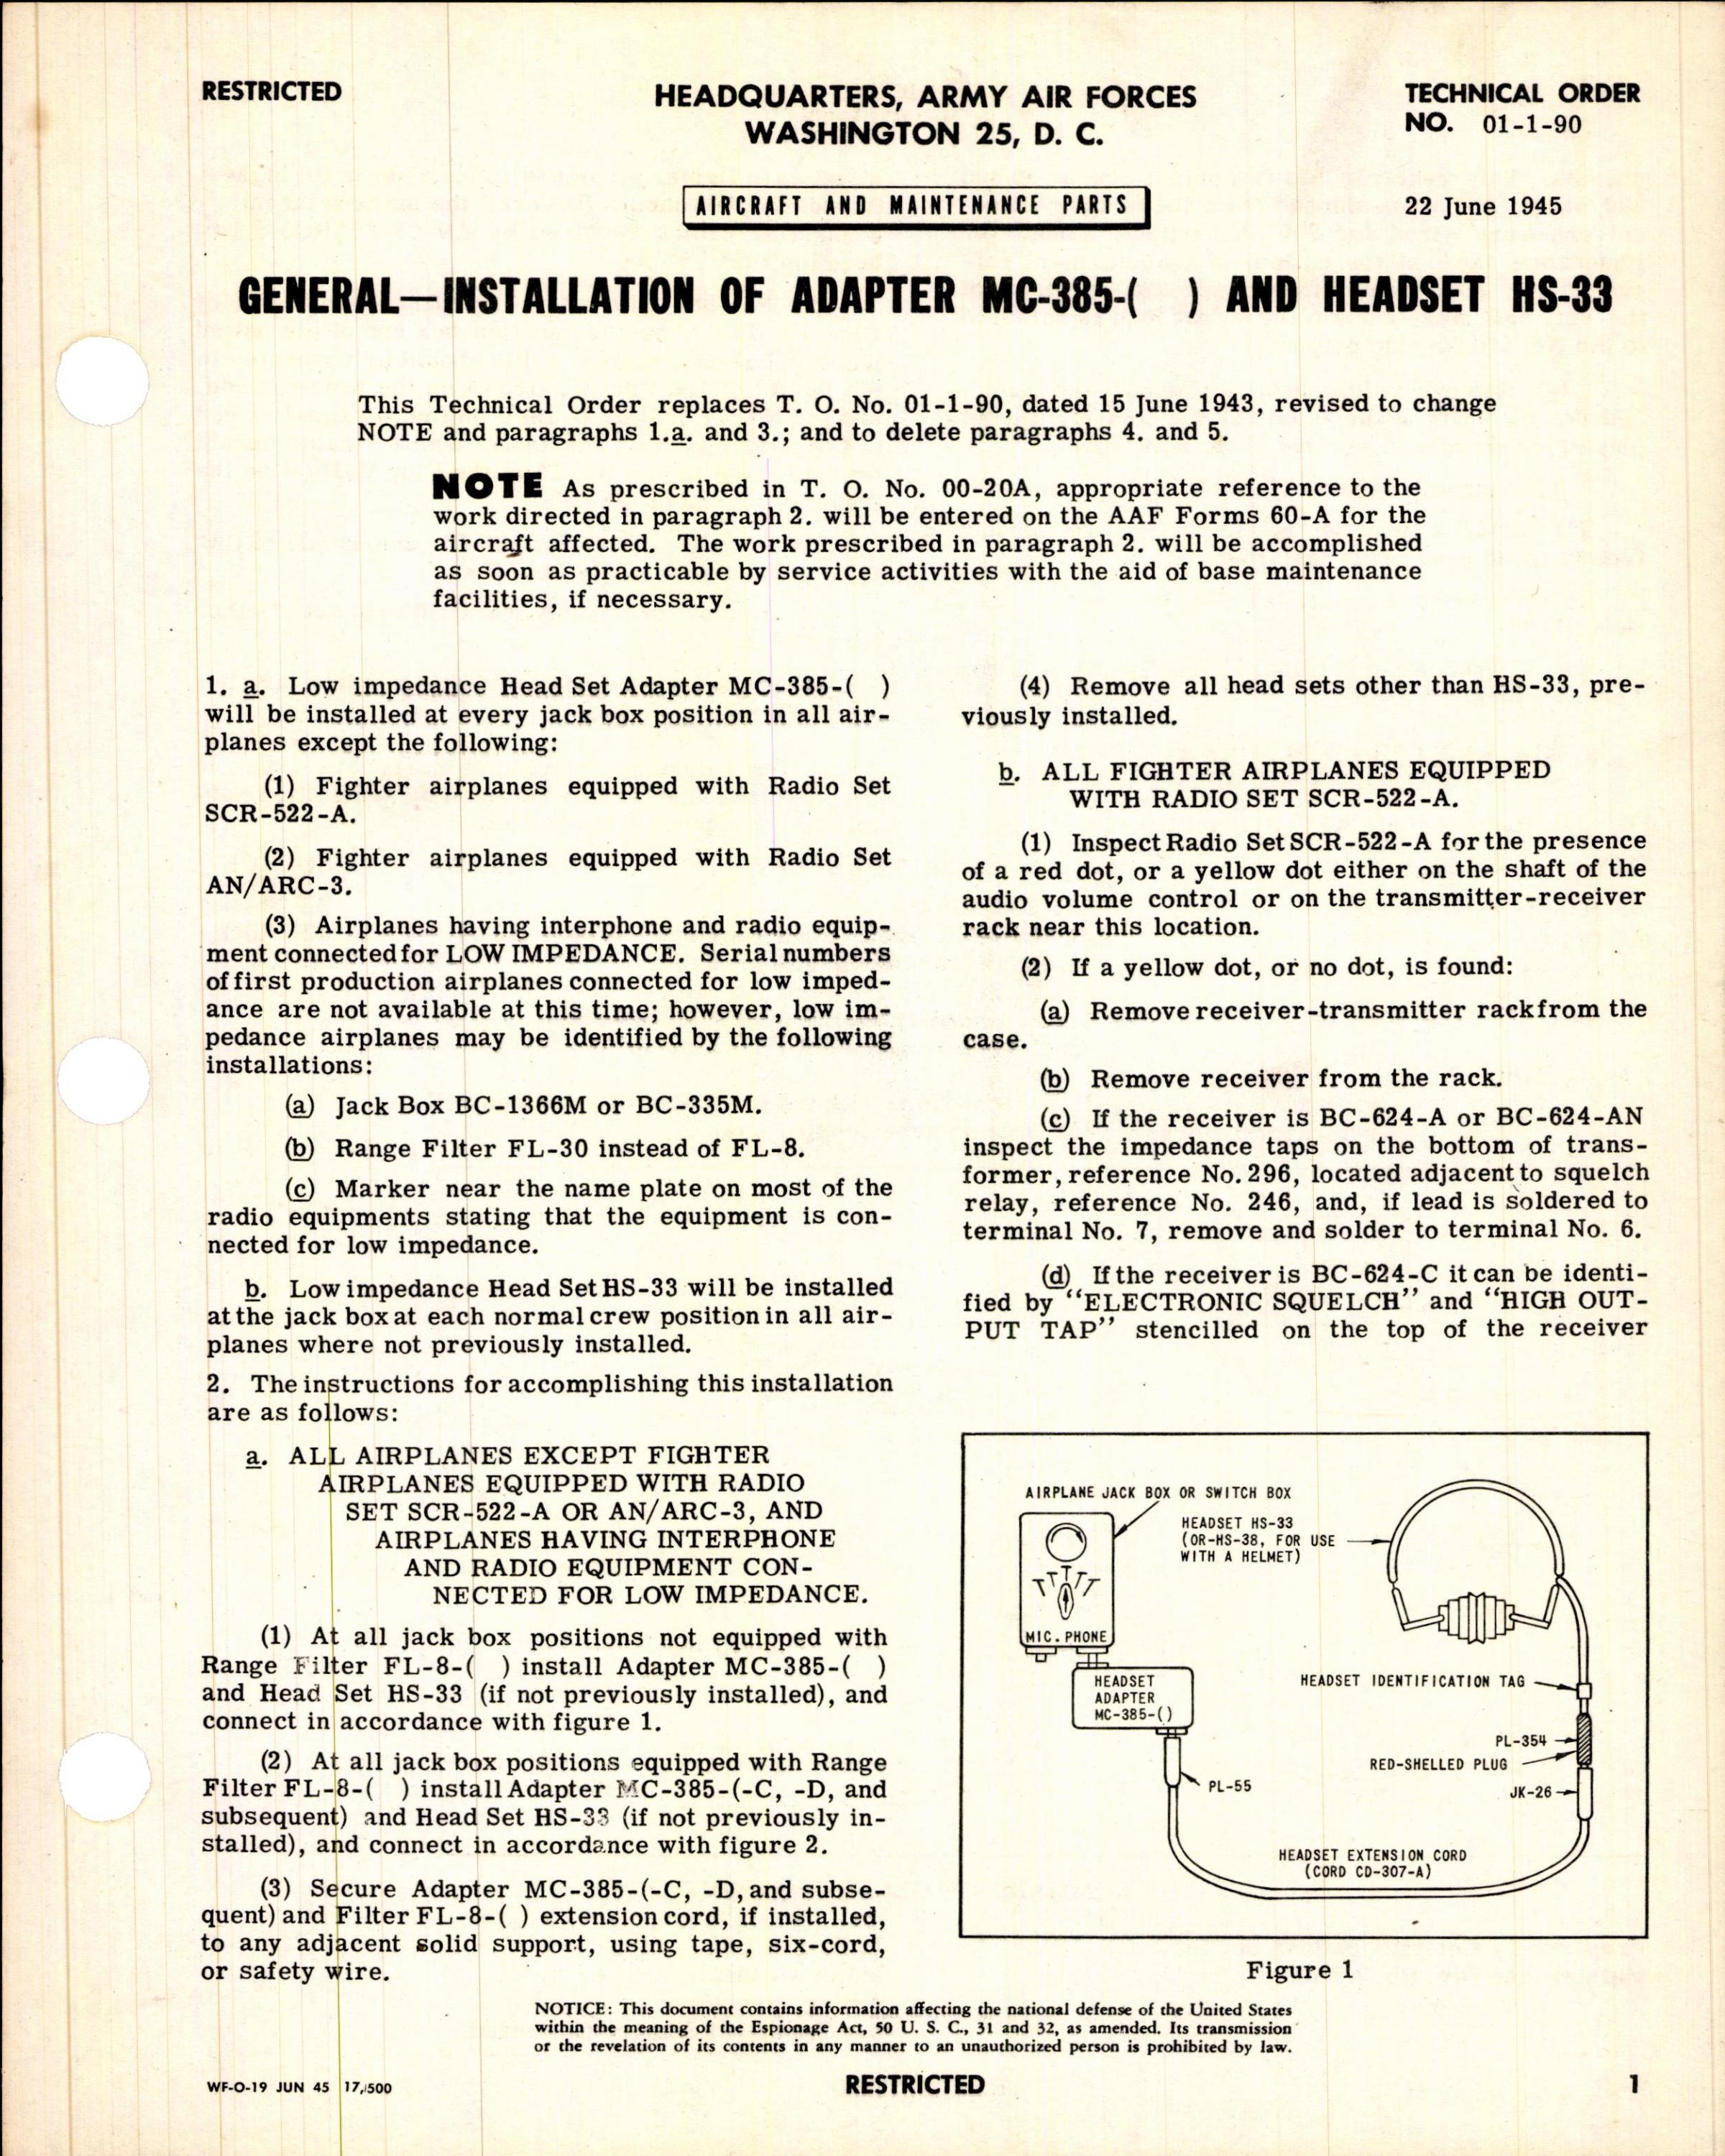 Sample page 1 from AirCorps Library document: Installation of Adapter MC-385 and Headset HS-33